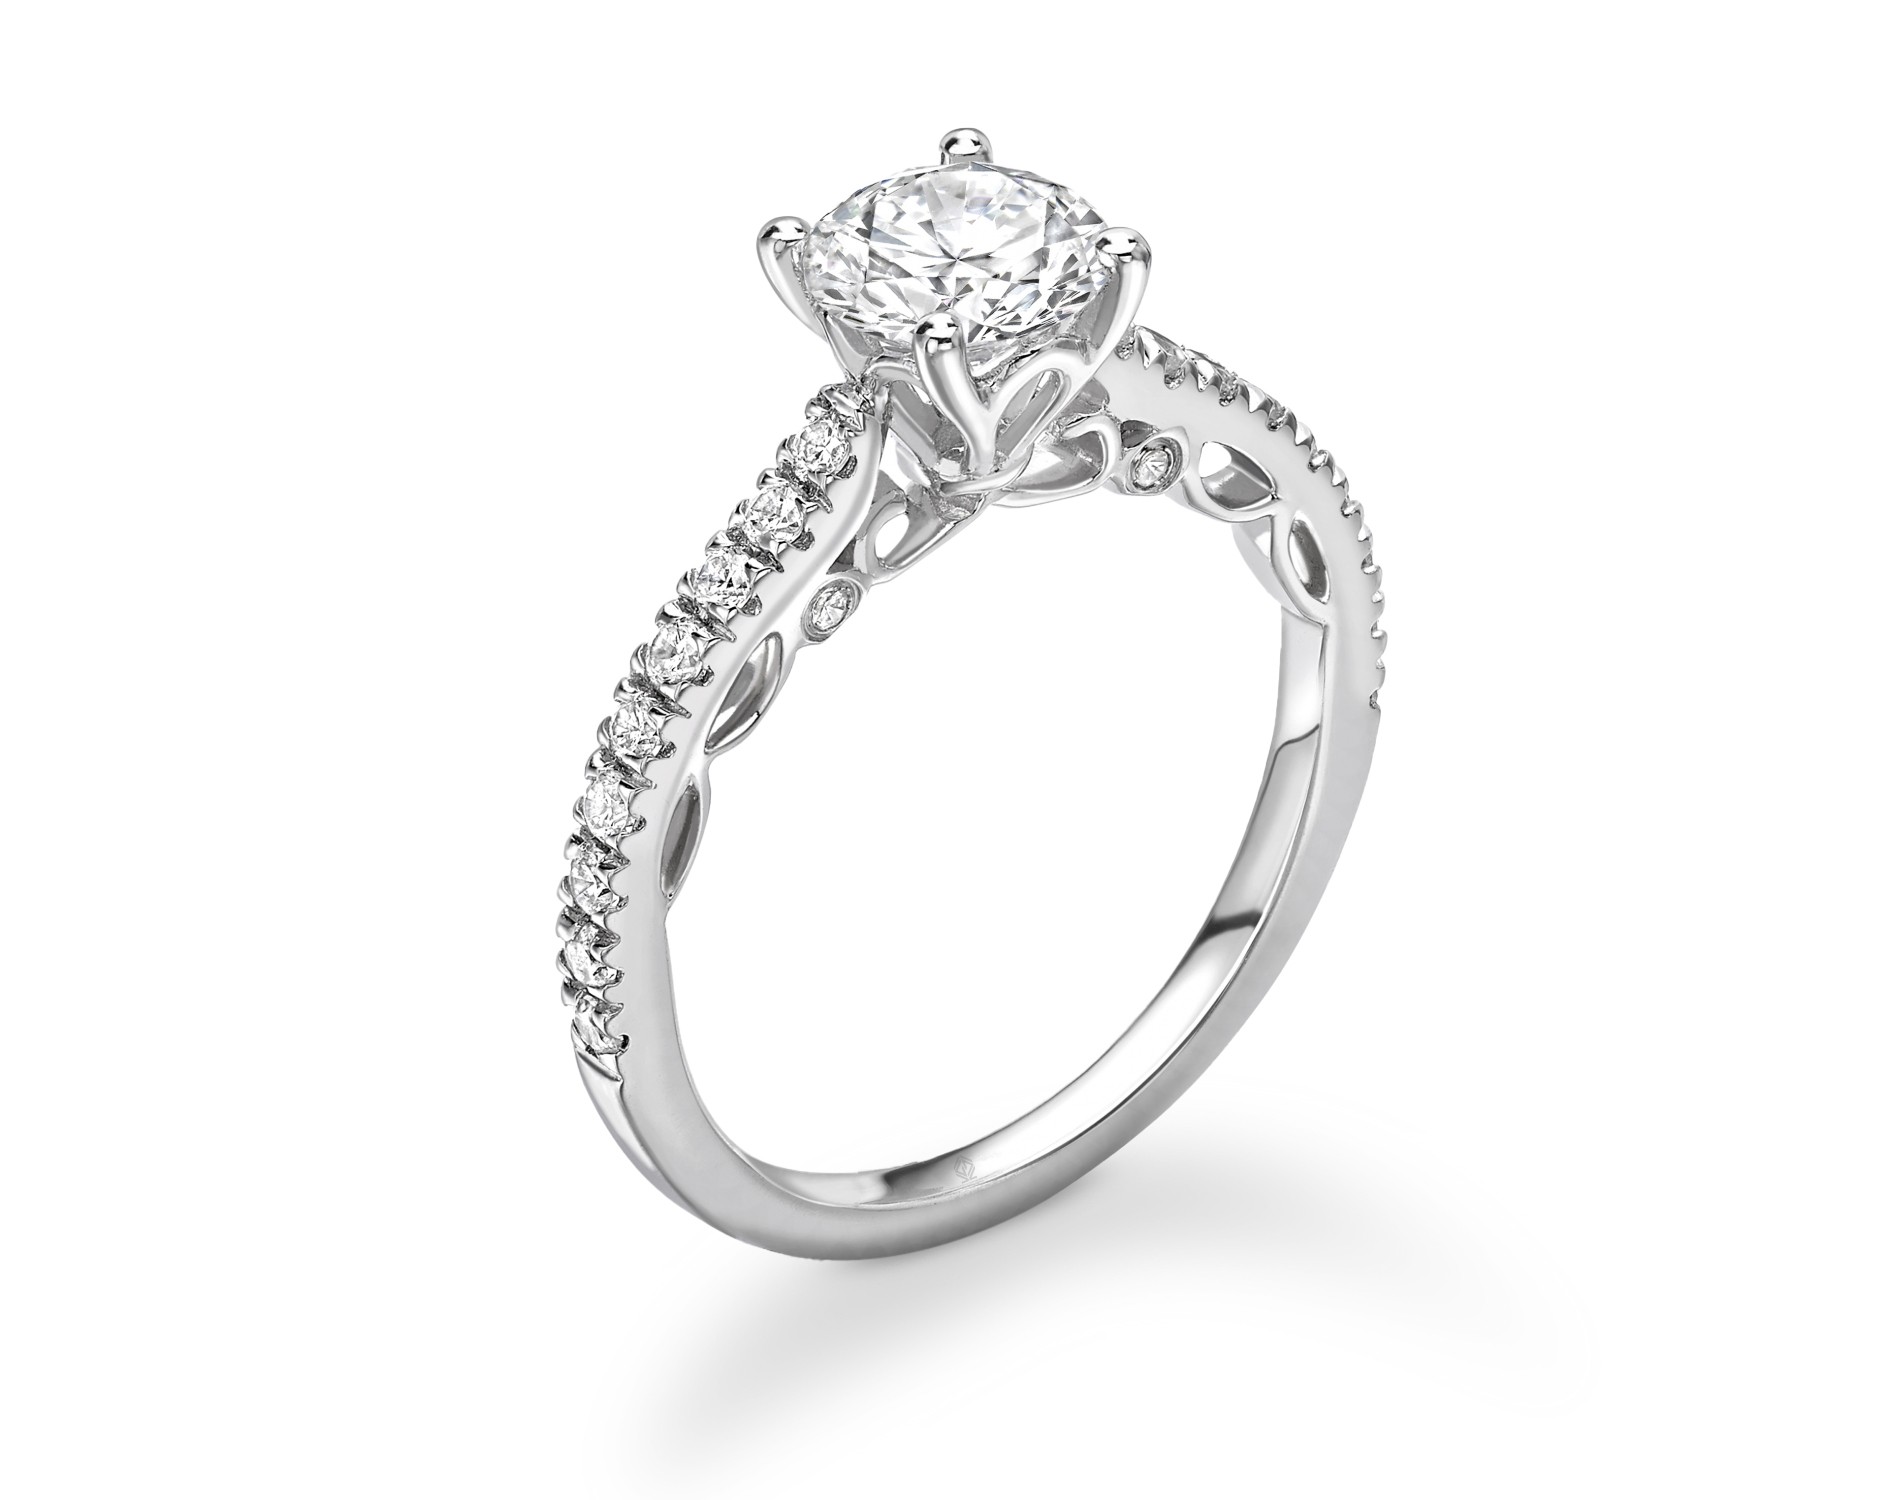 18K WHITE GOLD 4 PRONGS ROUND CUT DIAMOND ENGAGEMENT RING WITH SIDE STONES PAVE SET